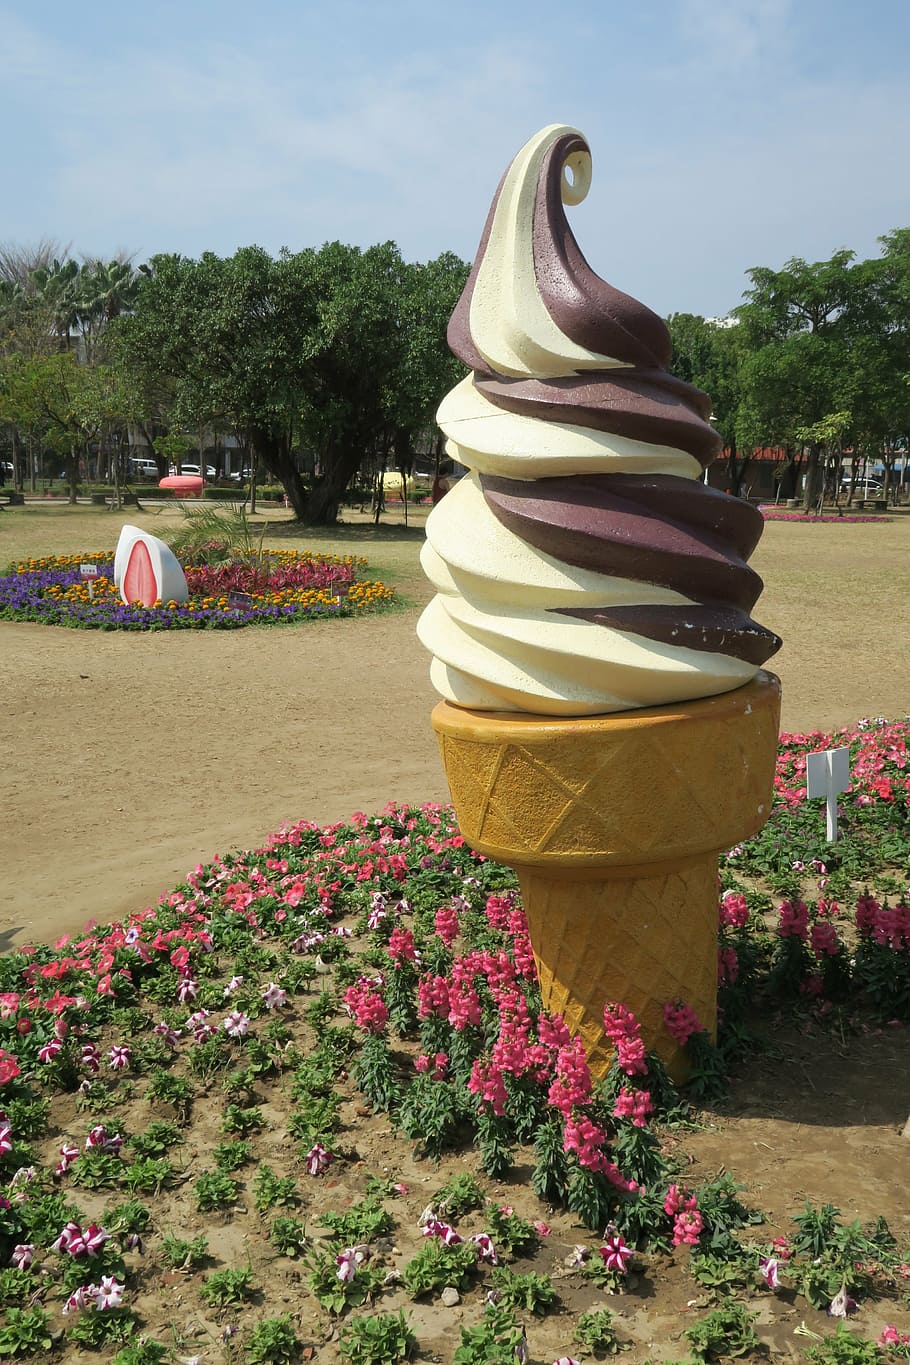 tainan's flowers offering, ice cream, duckweed farm park, plant, flowering plant, flower, nature, tree, day, growth